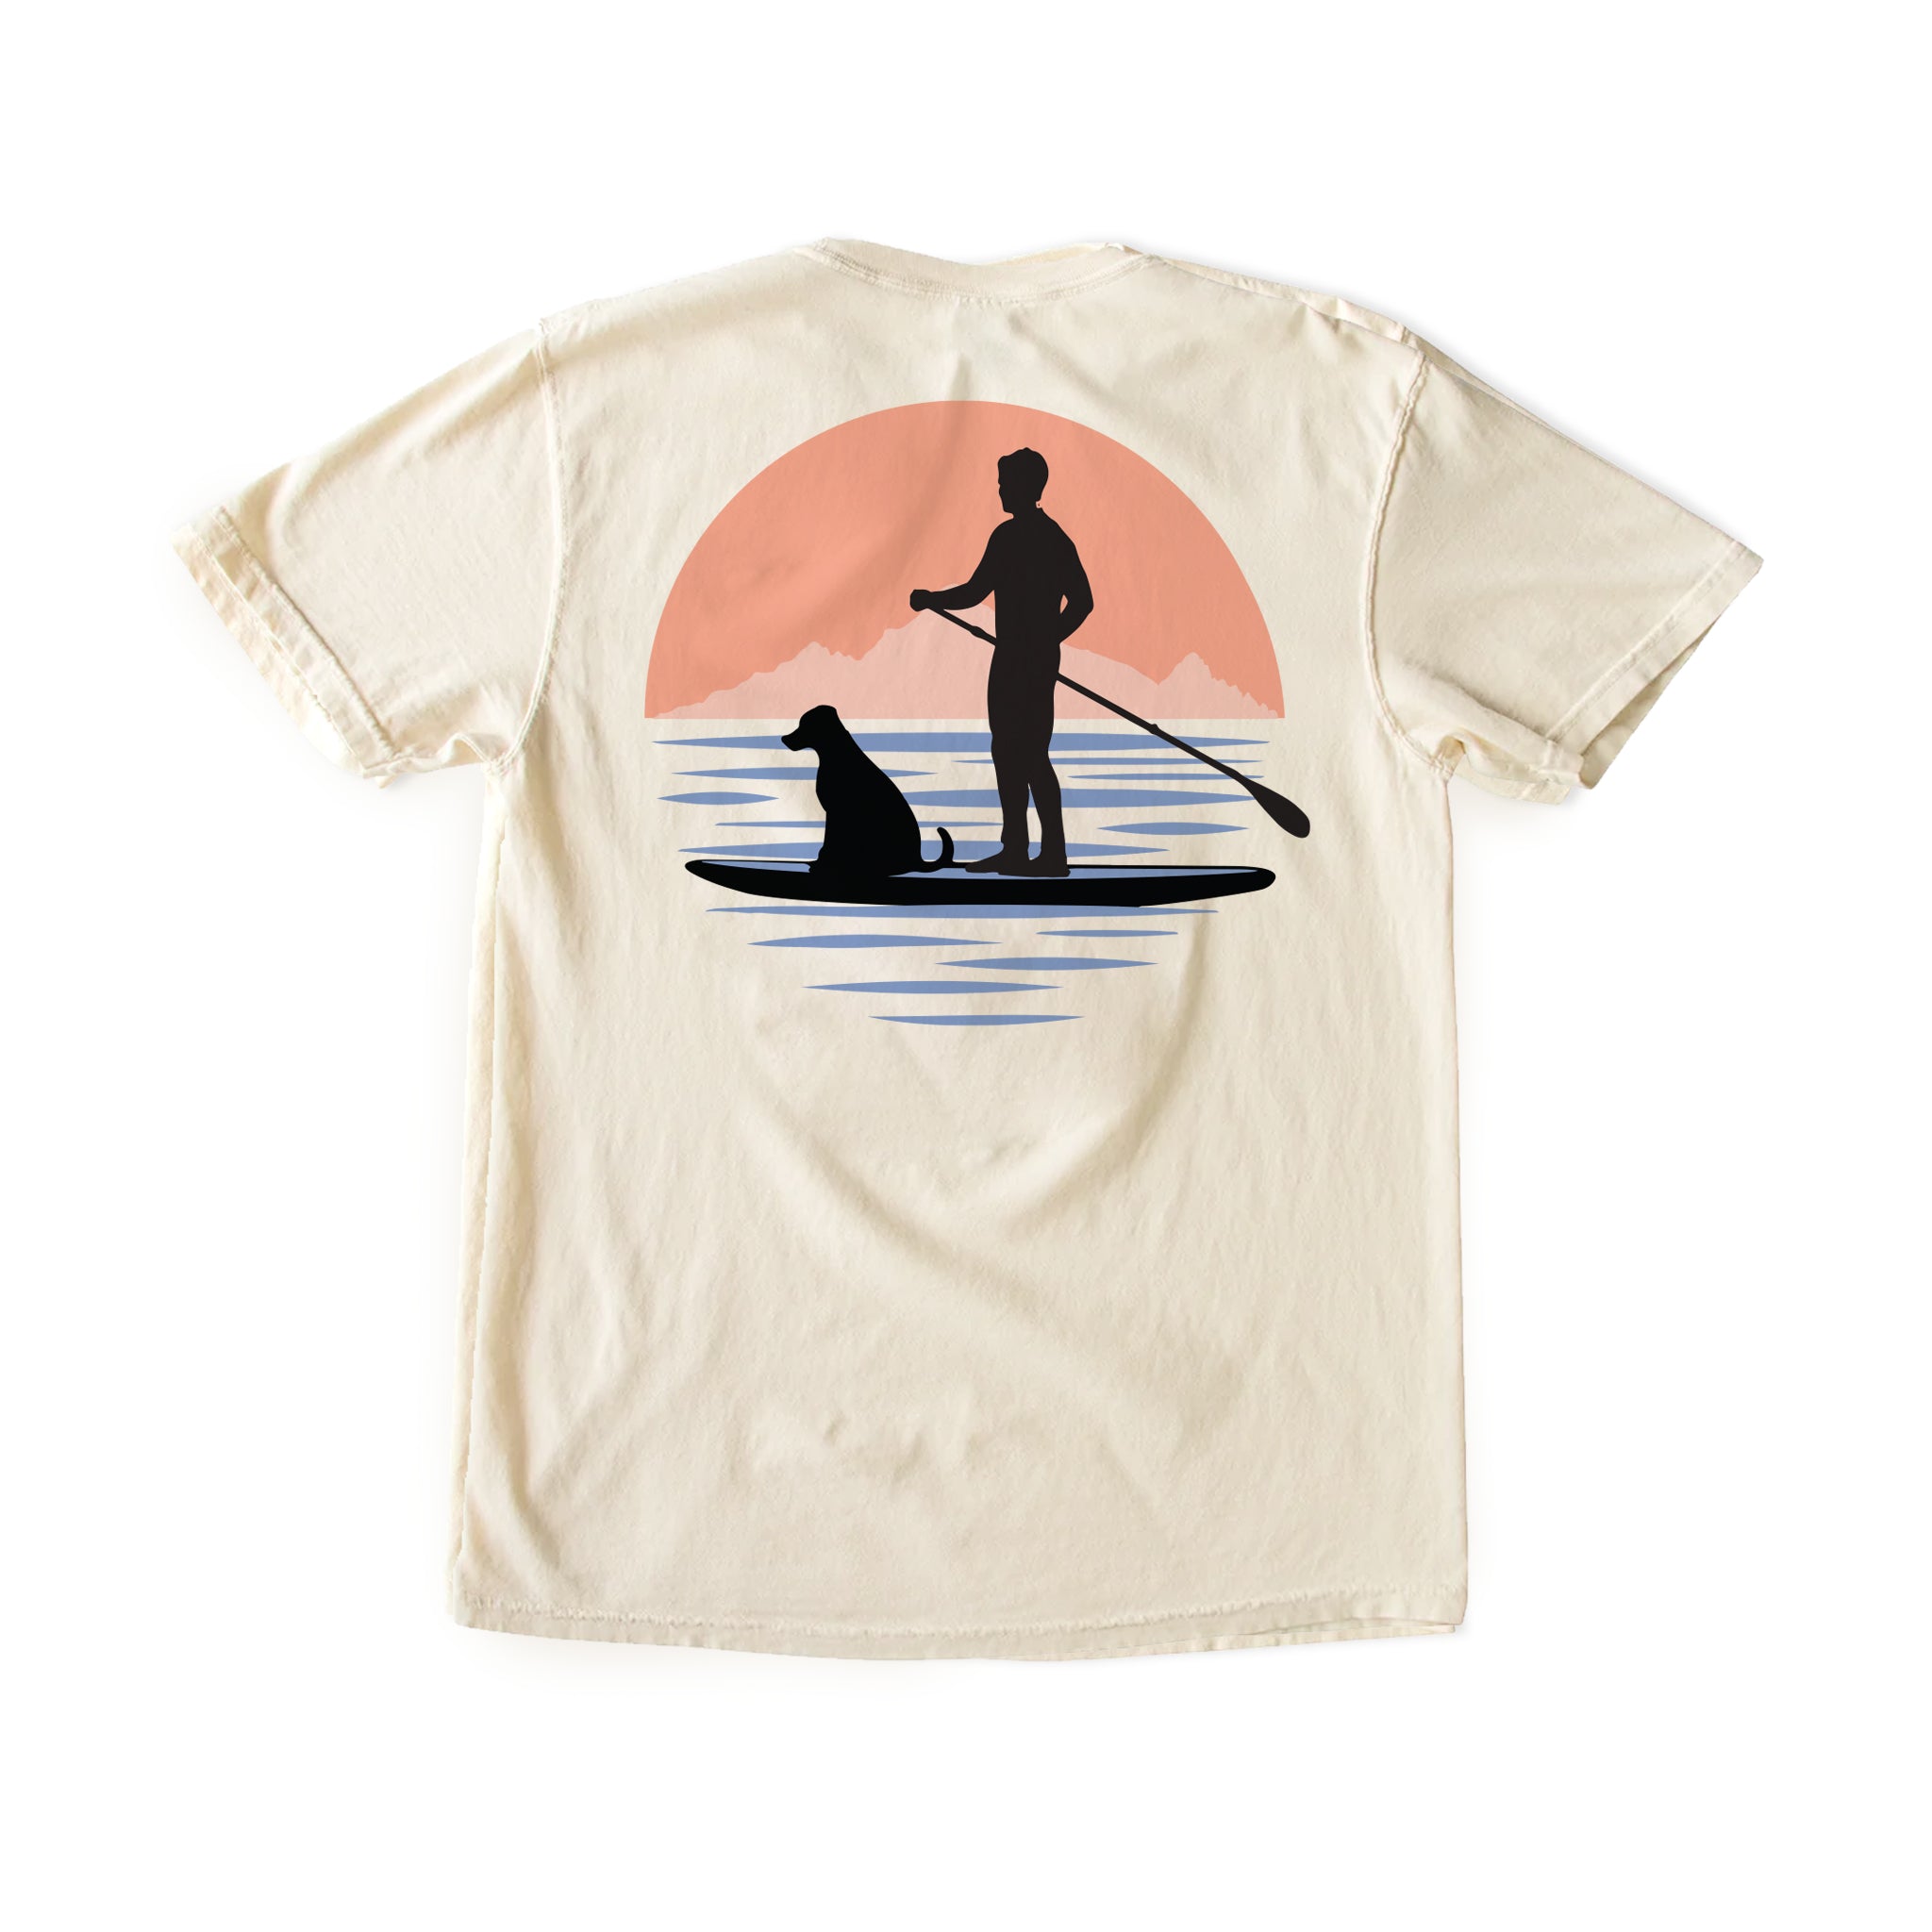 Of These Mountains SUP at Sunset Graphic Tee